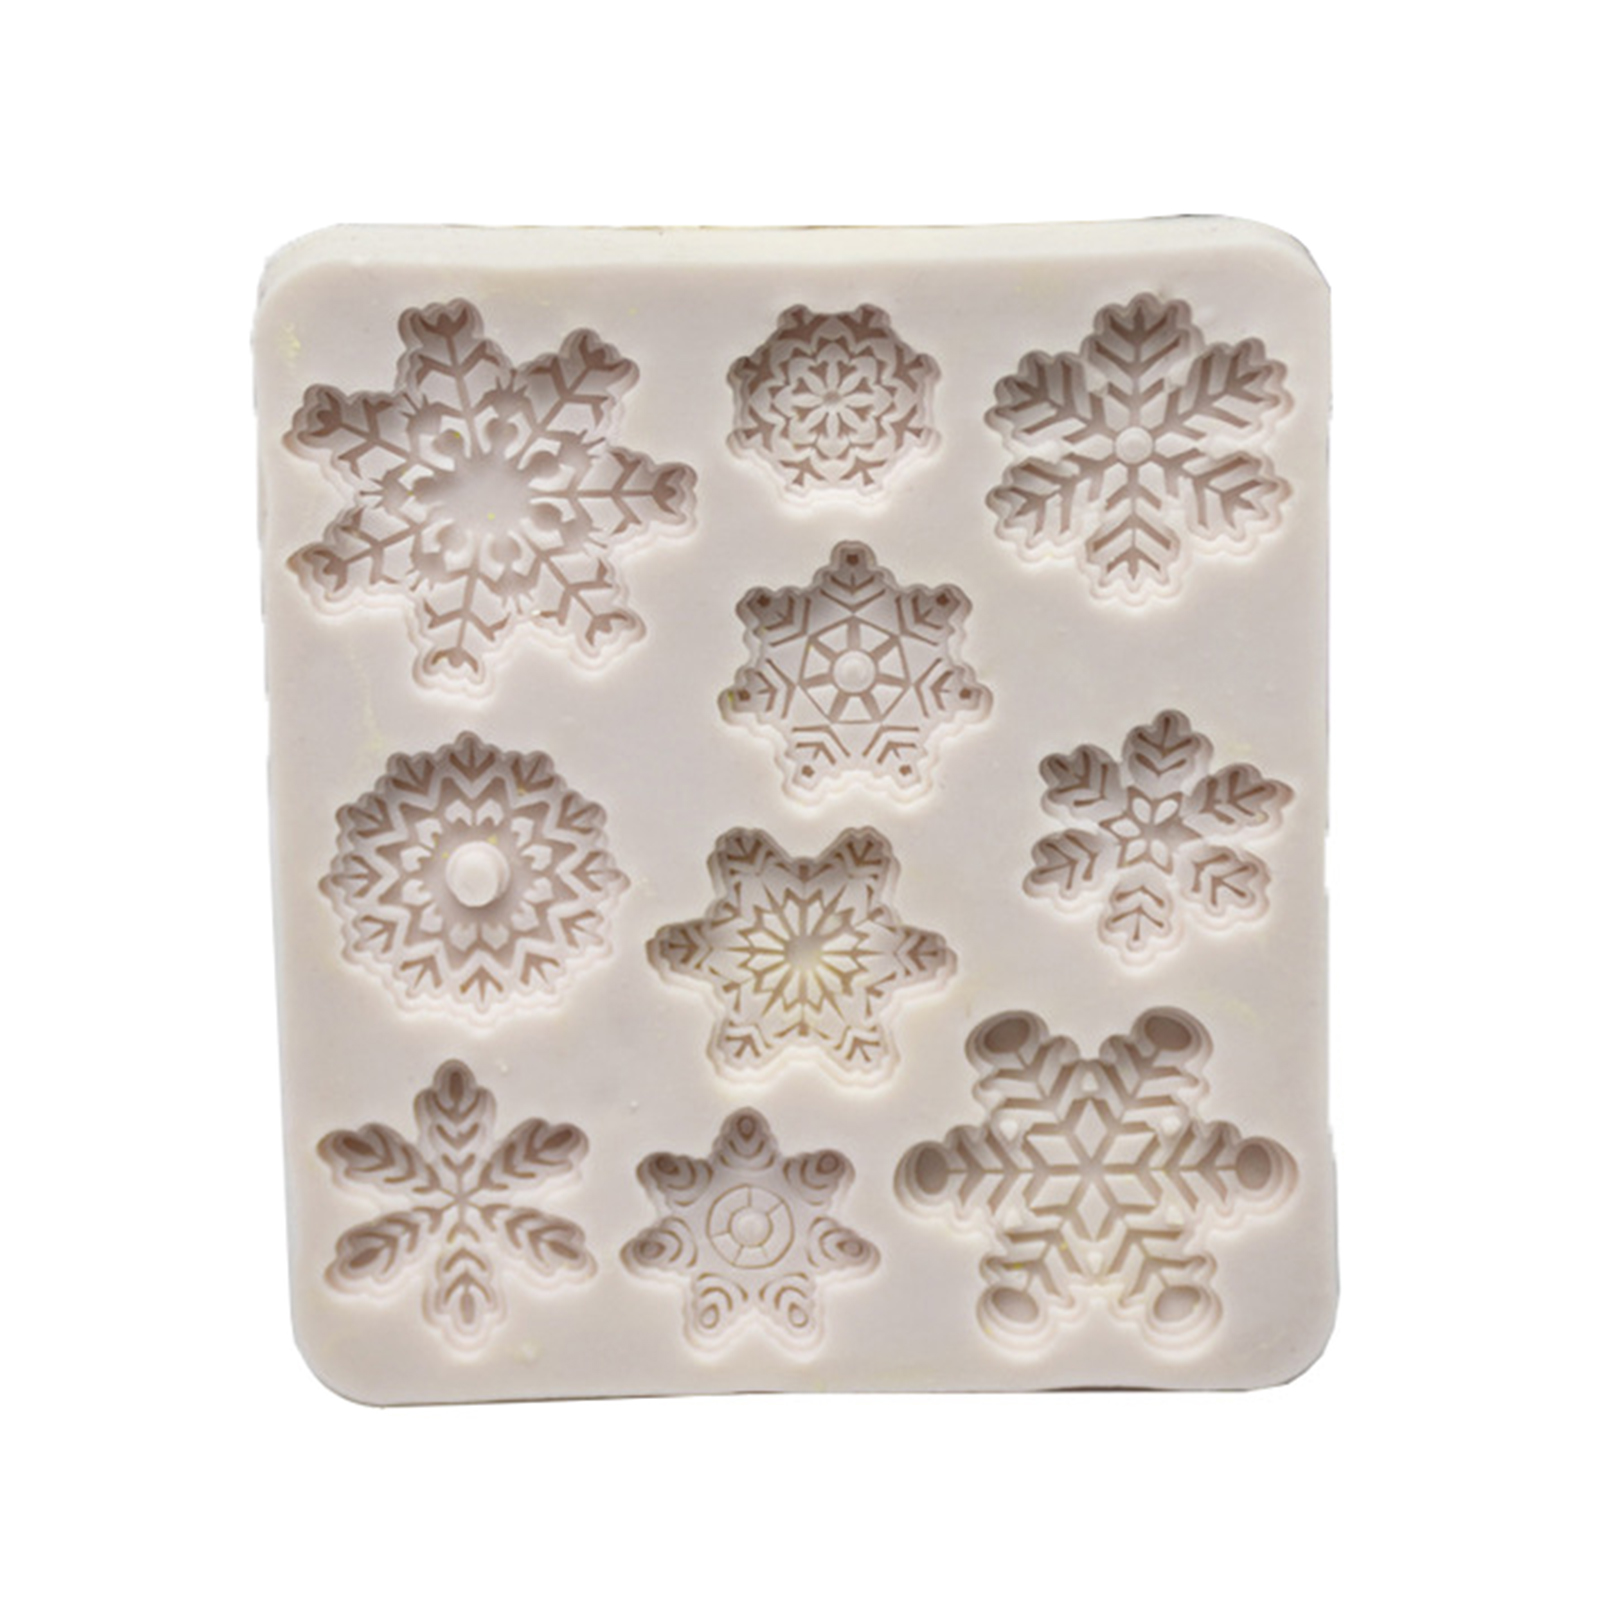 Grandest Birch Snowflake Epoxy Silicone Mold Chocolate Candy Mold Christmas DIY Baking Tool Gray Silicone, Size: 9.1